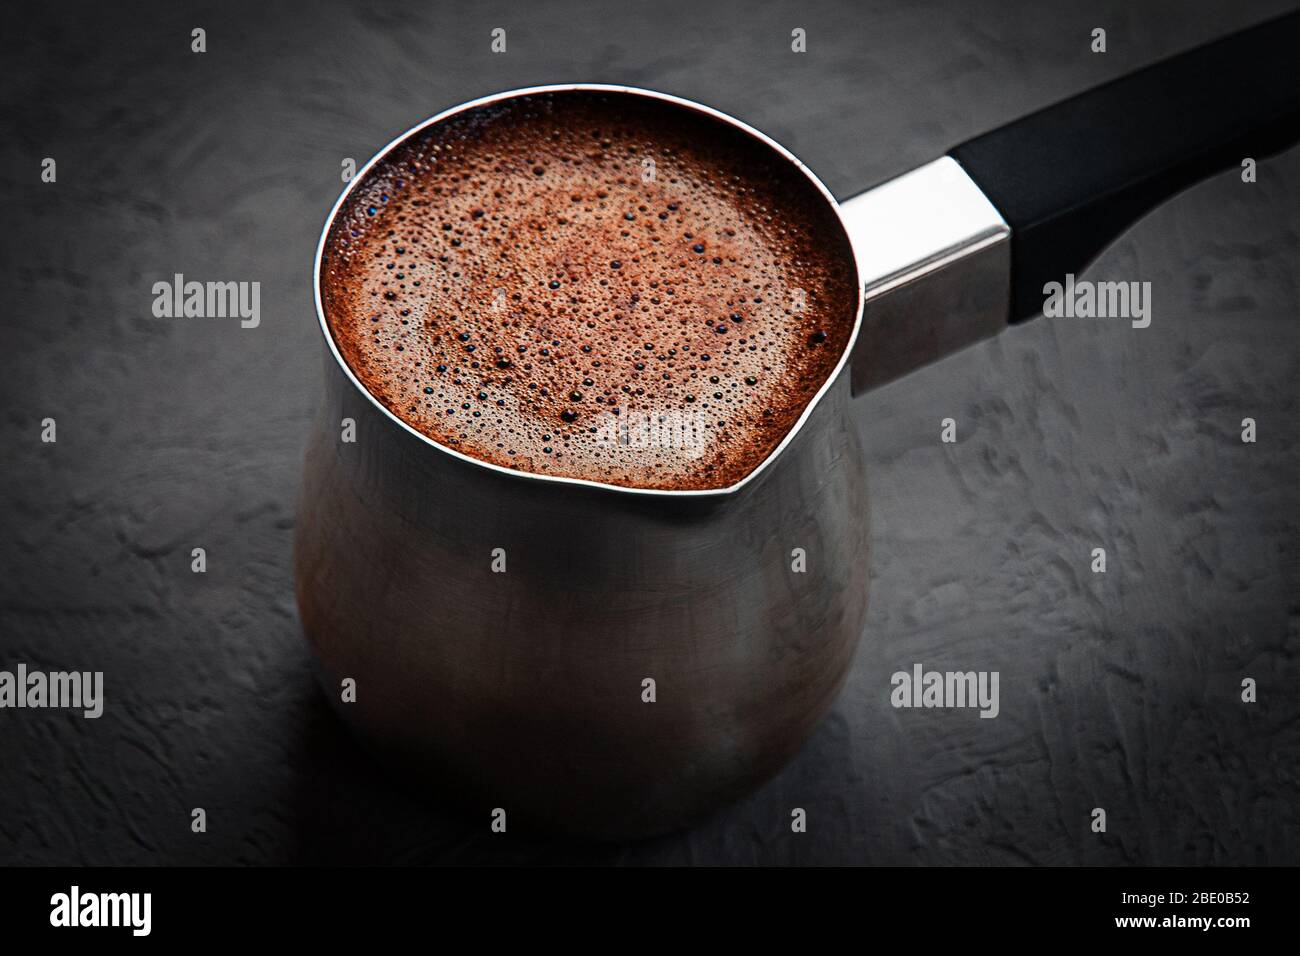 coffee with brown froth brewed in cezve on dark gray background Stock Photo